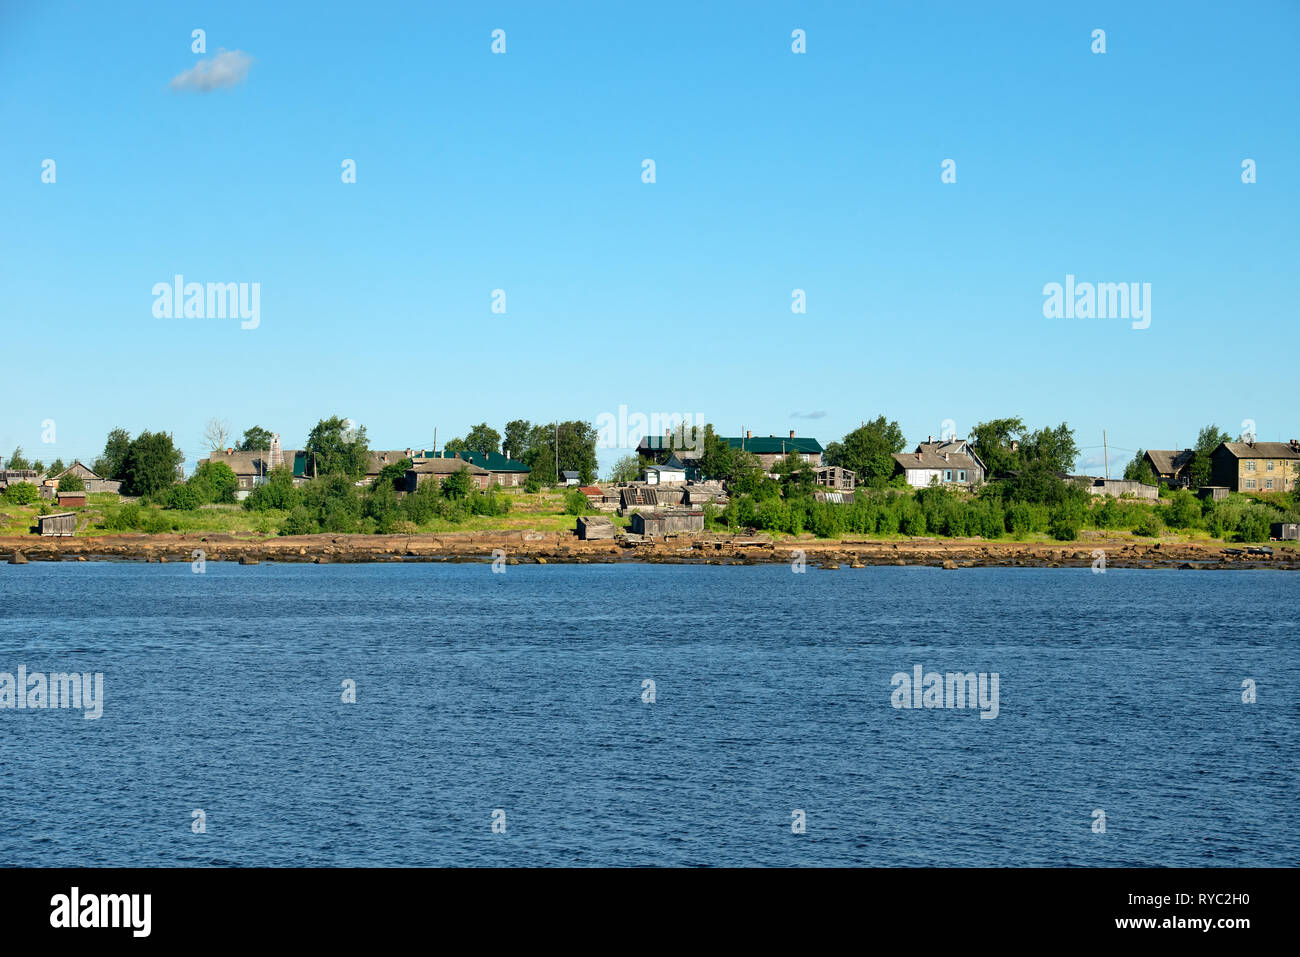 Village of Rabocheostrovsk, Kem. View from the White Sea, Arkhangelsk Region, Russia Stock Photo